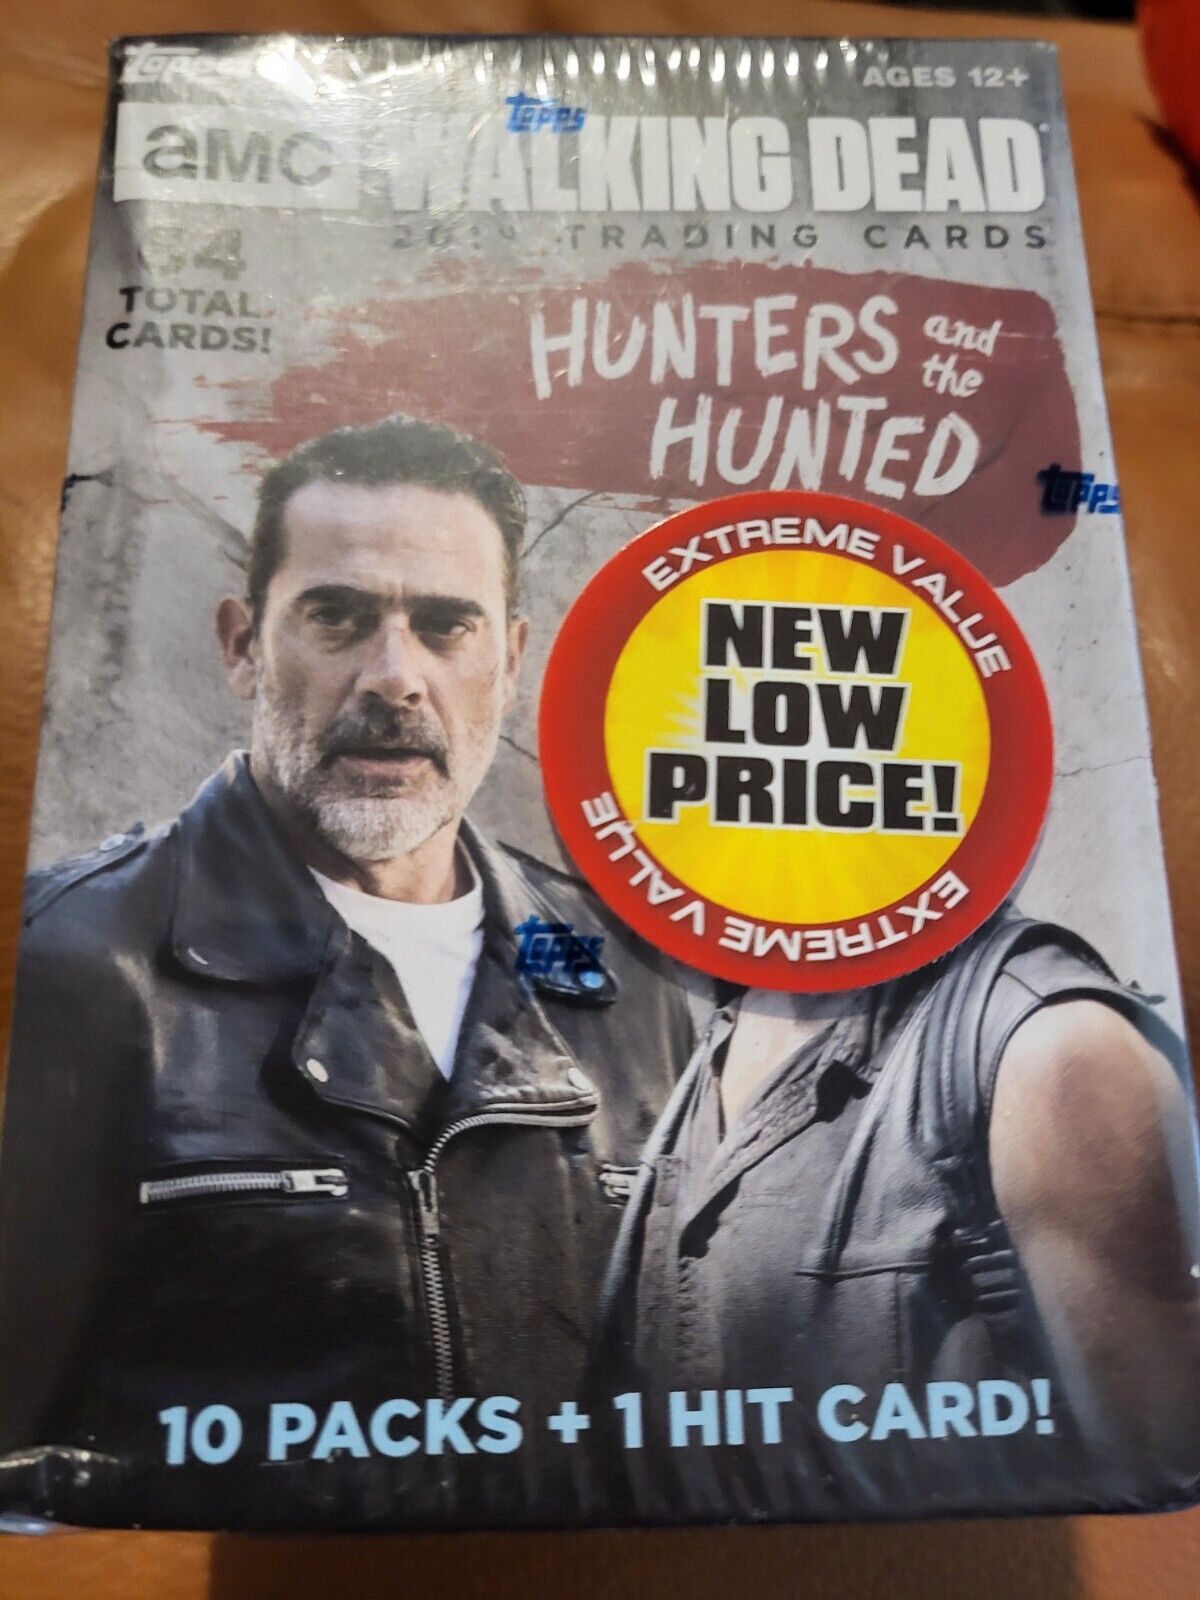 2018 Topps AMC Walking Dead Cards *Hunters & The Hunted* ~Factory Sealed & NIB~